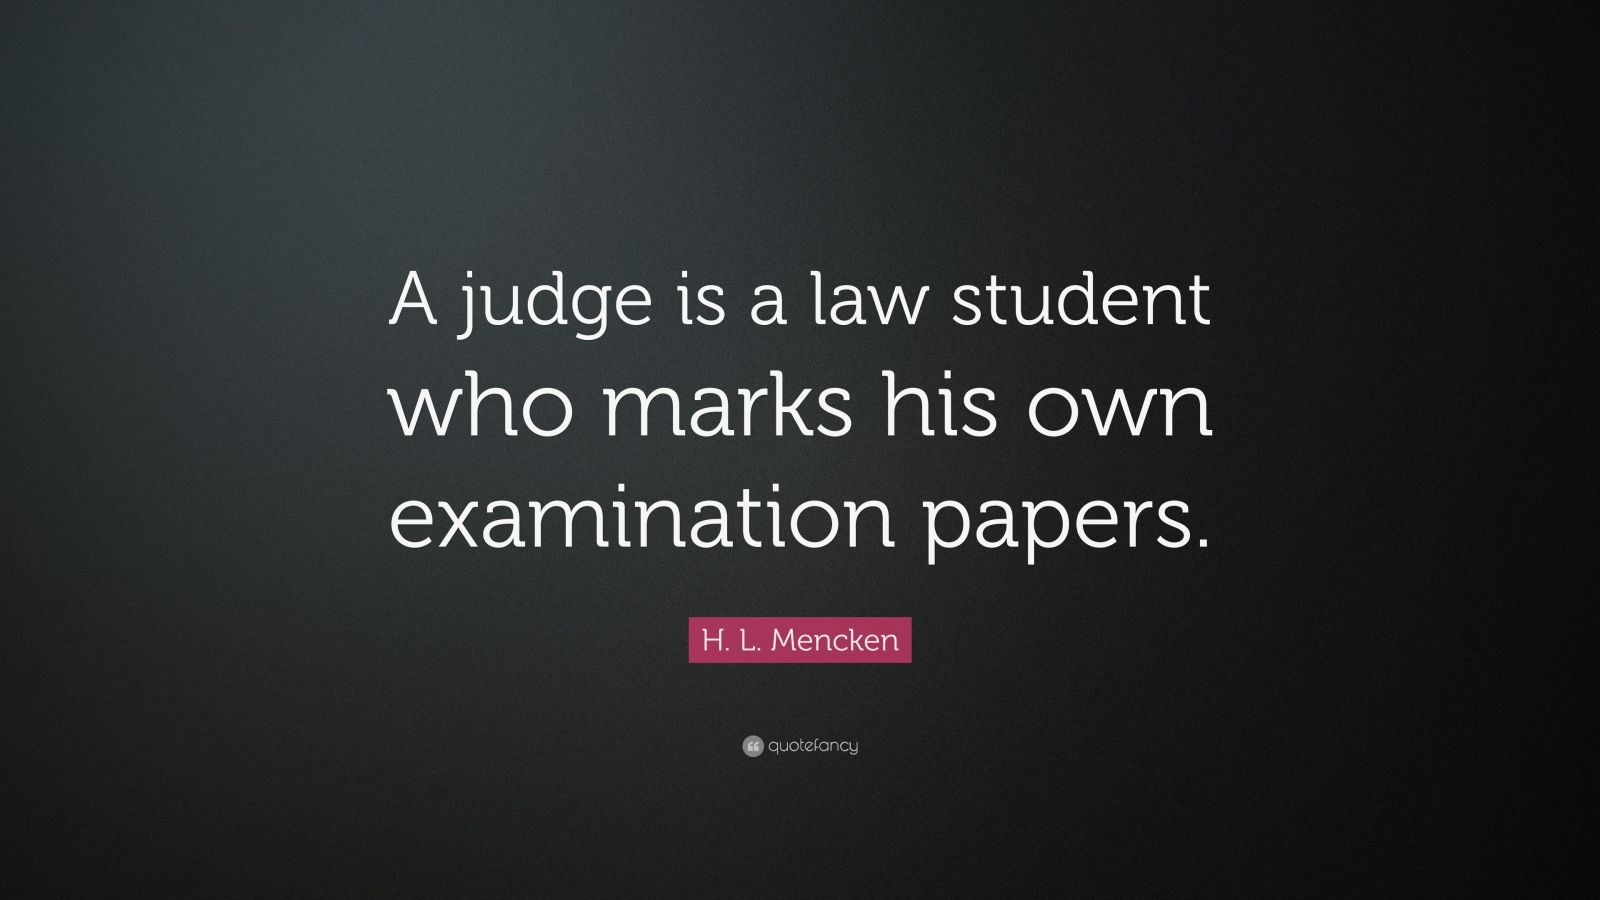 H. L. Mencken Quote: “A judge is a law student who marks his own examination papers.”